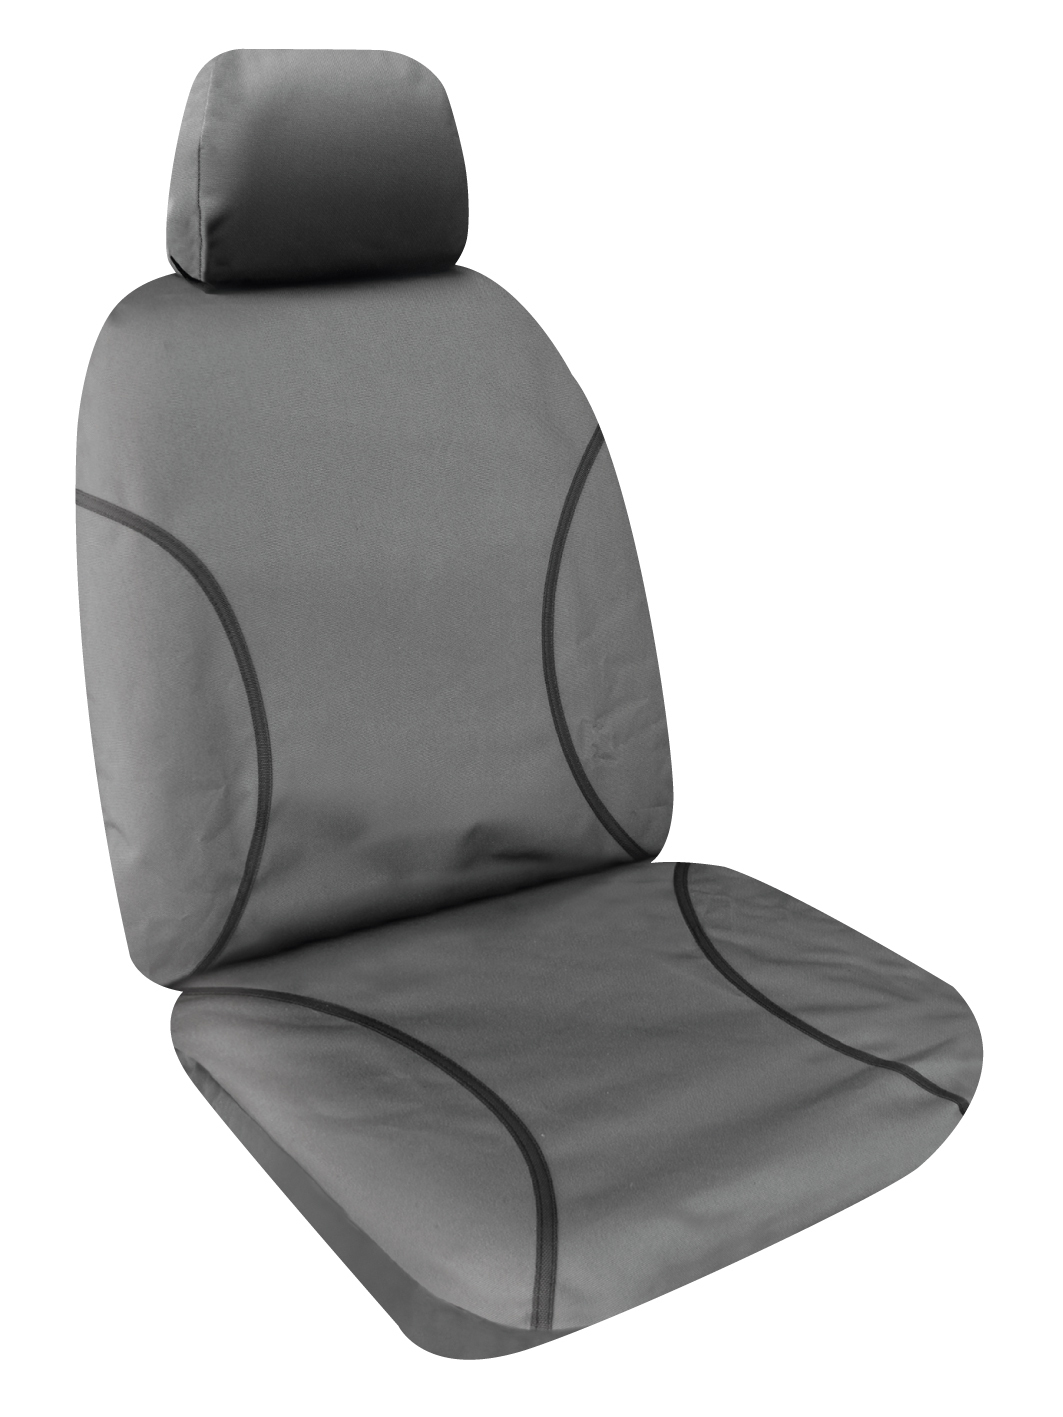 SPERLING REAR ROW SEAT COVERS TO SUIT TOYOTA LANDCRUISER (200 SERIES) GXL, 8 SEATER 2007 ON